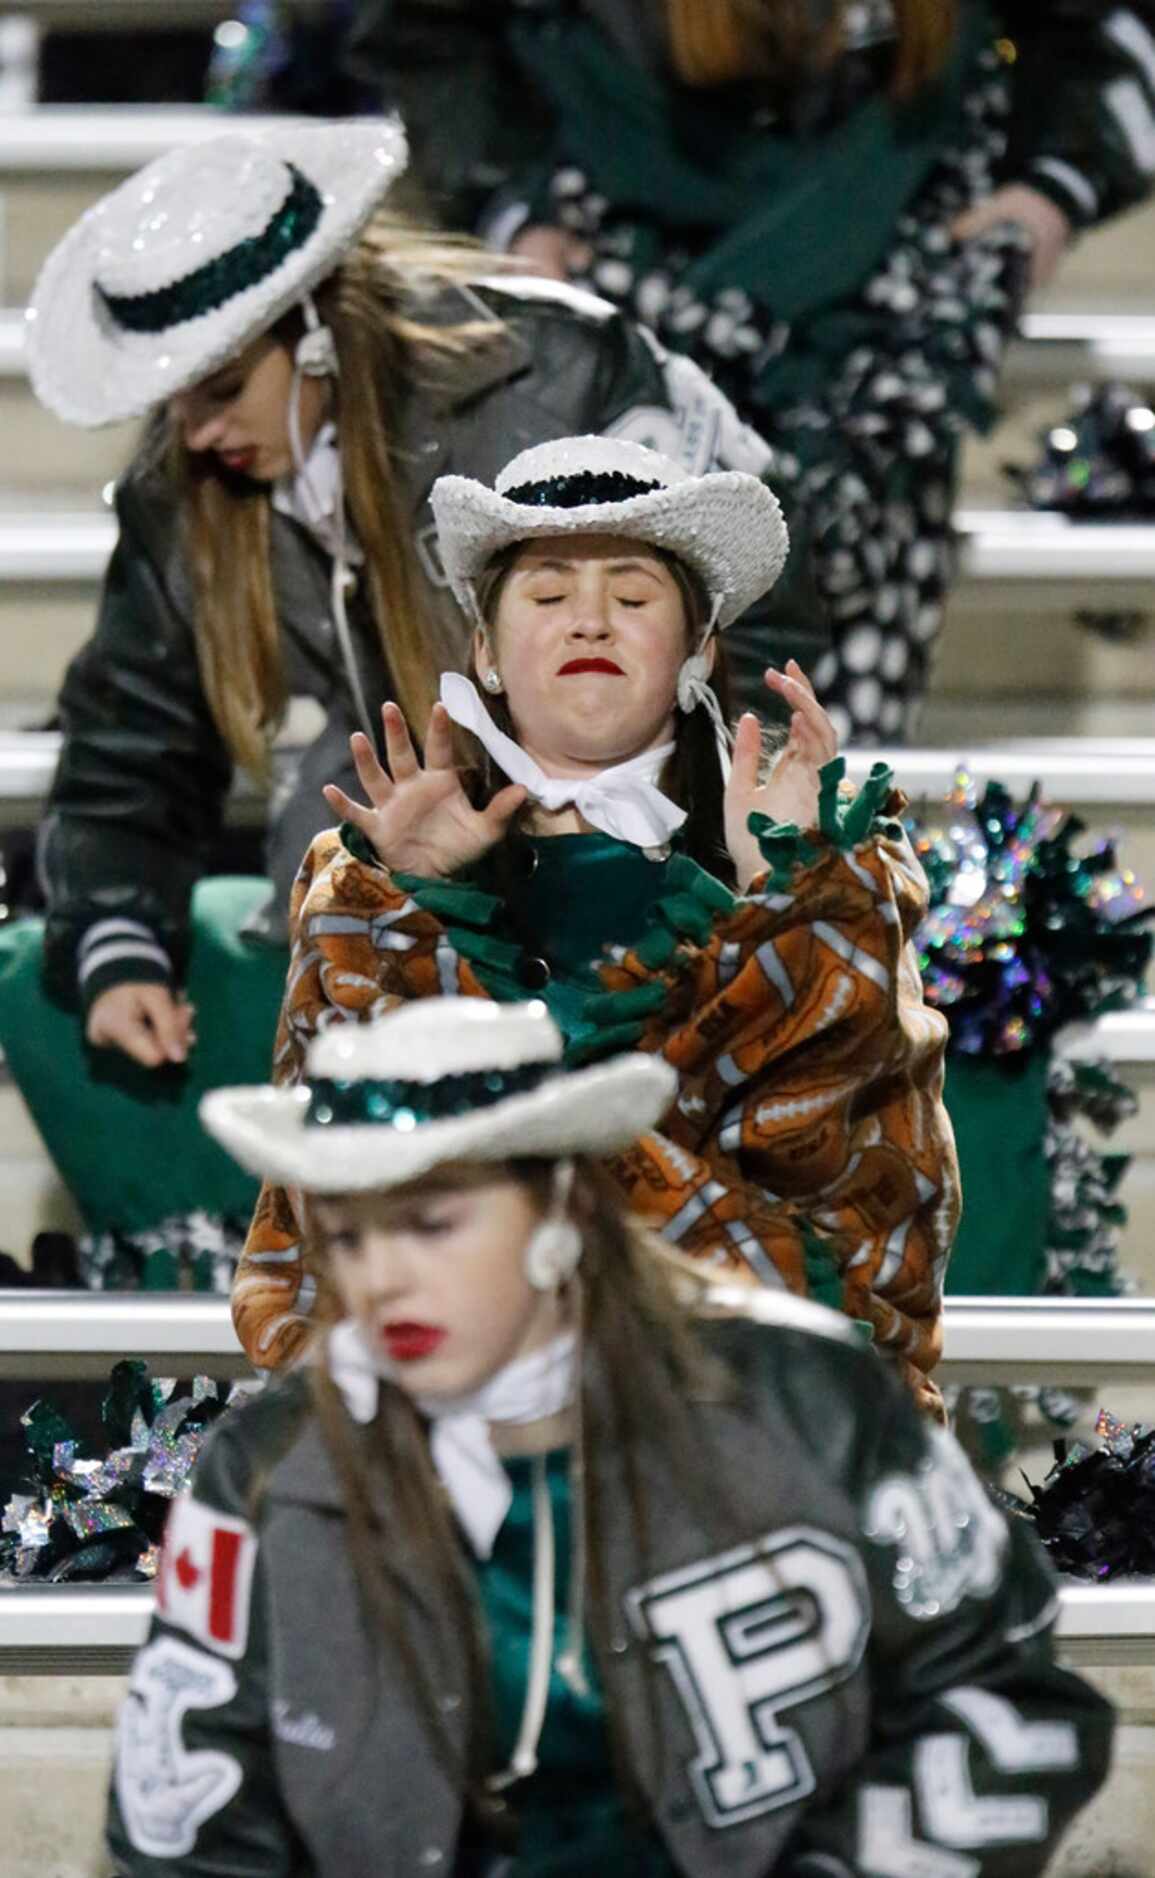 Rowan Abrams, 15, with the Prosper High School Talonette drill team, feels the bite of cold...